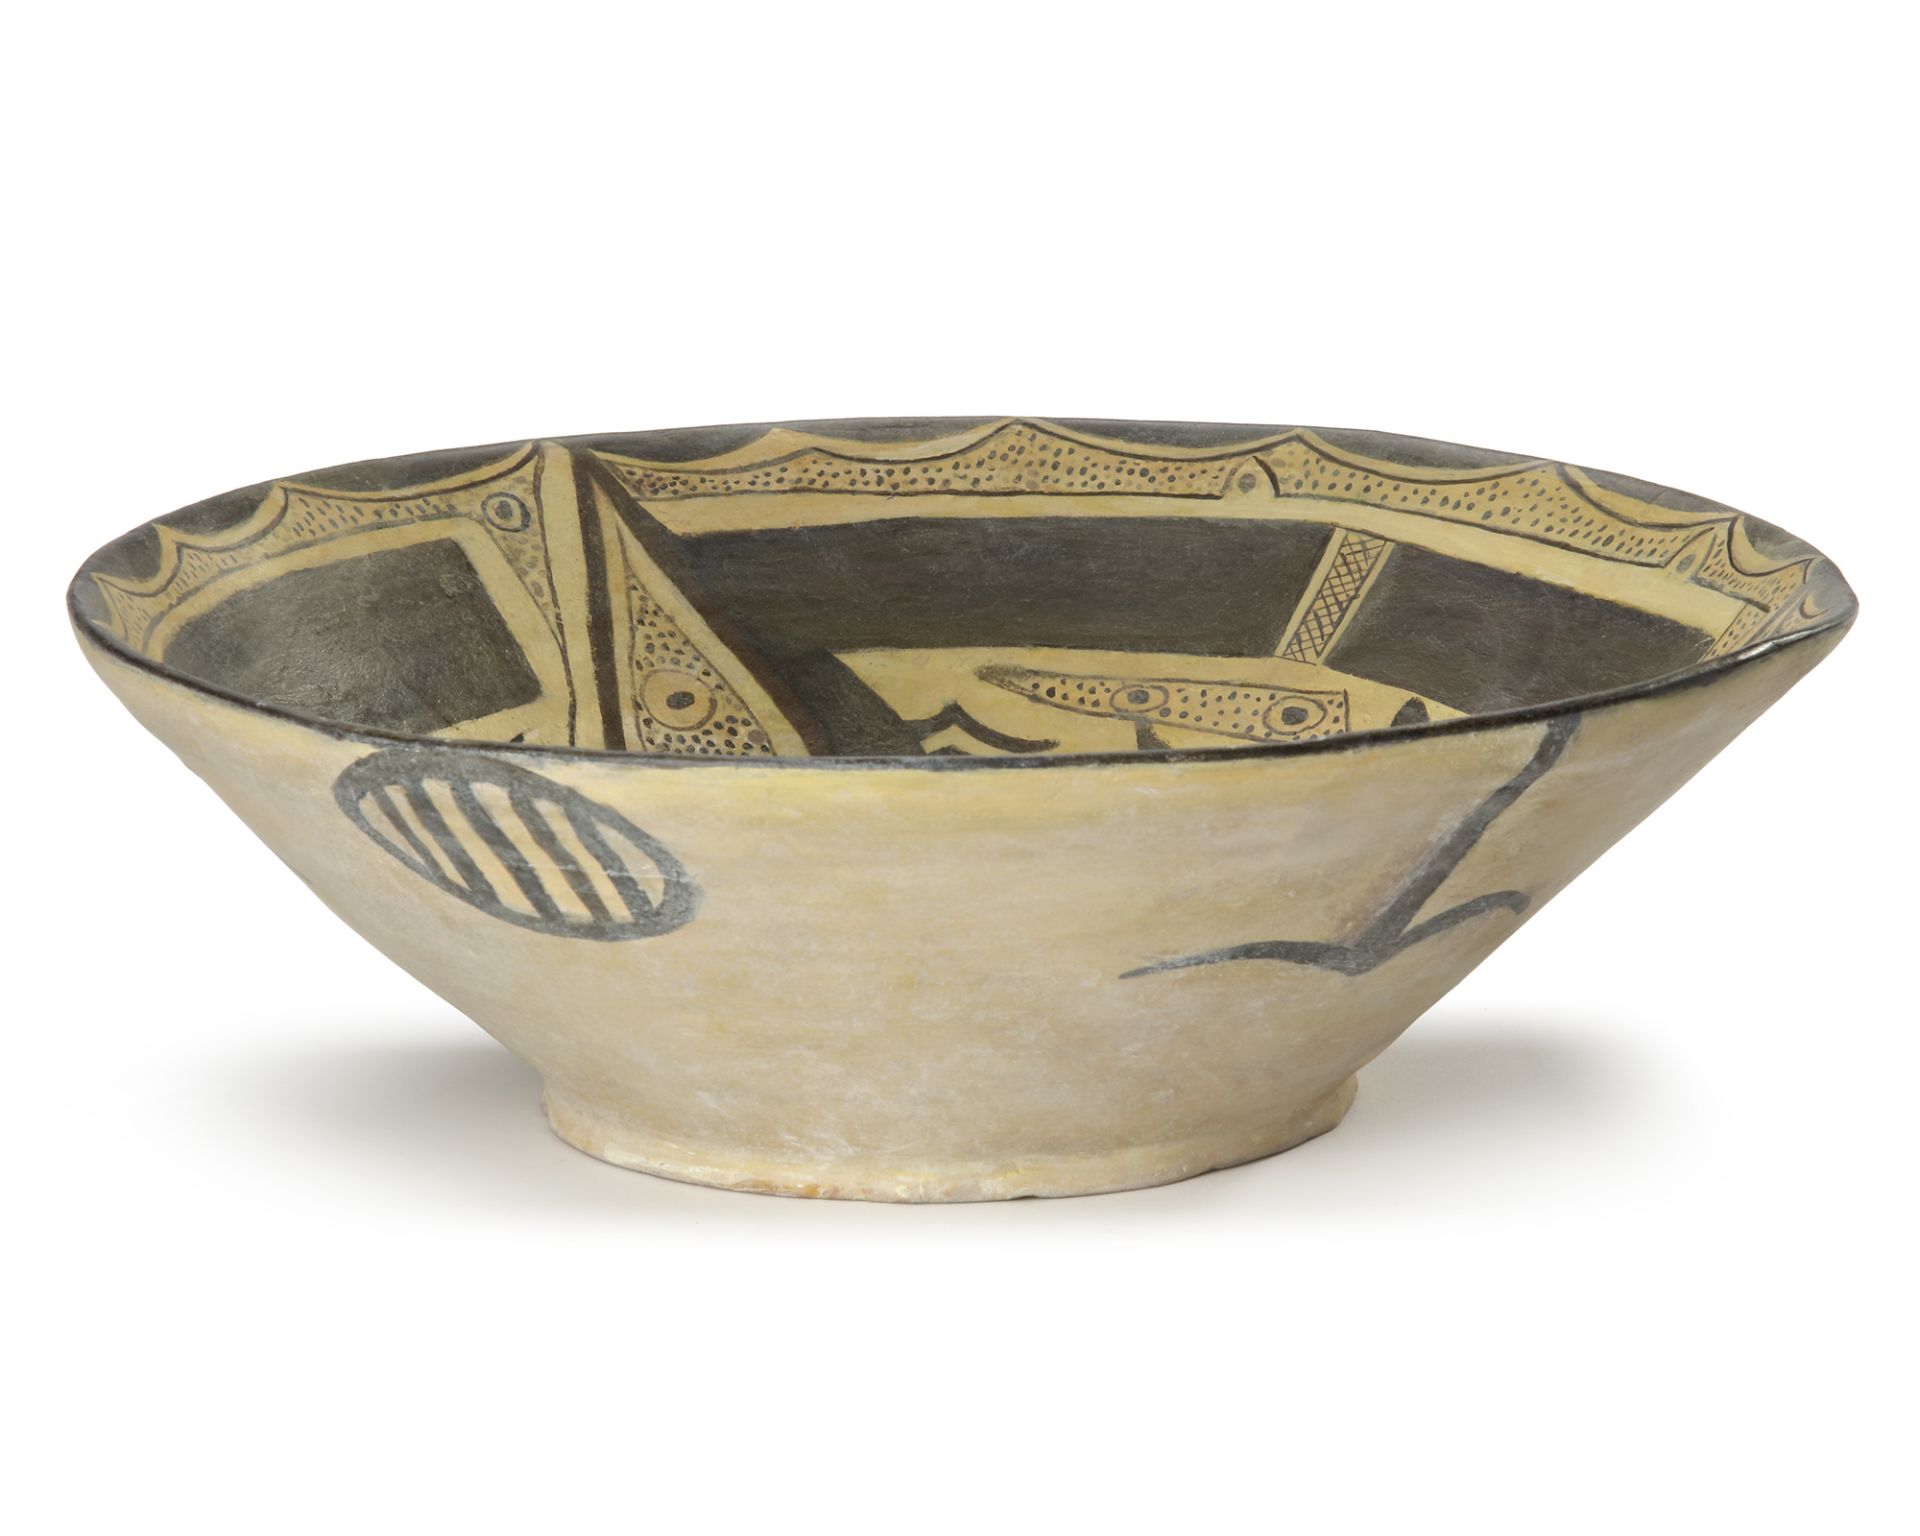 A NISHAPUR POTTERY BOWL, EASTERN PERSIA, 10TH CENTURY - Image 3 of 5